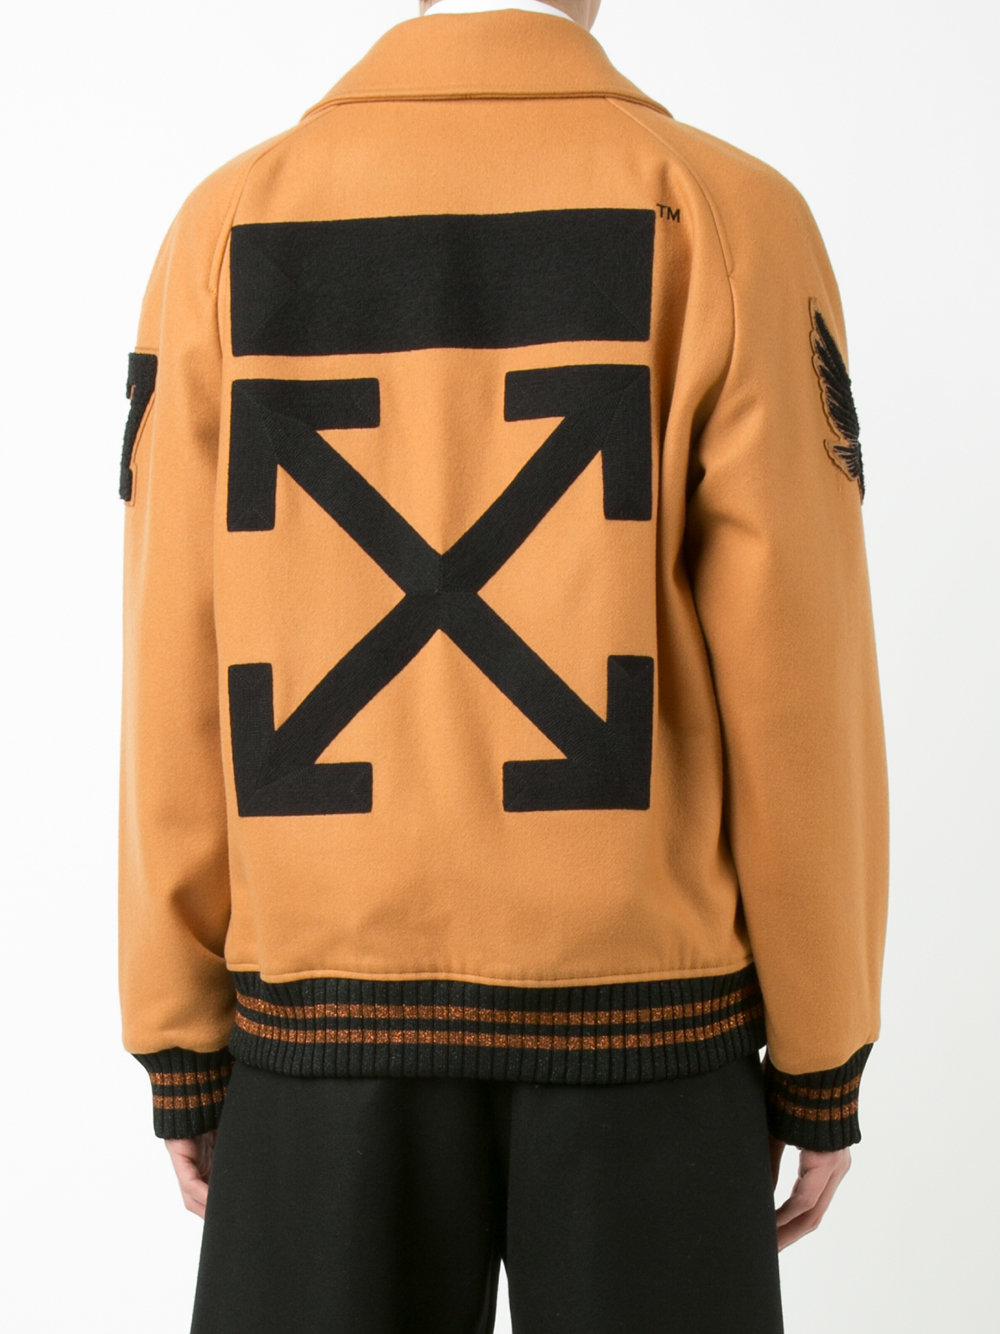 Off-White c/o Virgil Abloh Wool Patched Varsity Jacket in Brown for Men -  Lyst